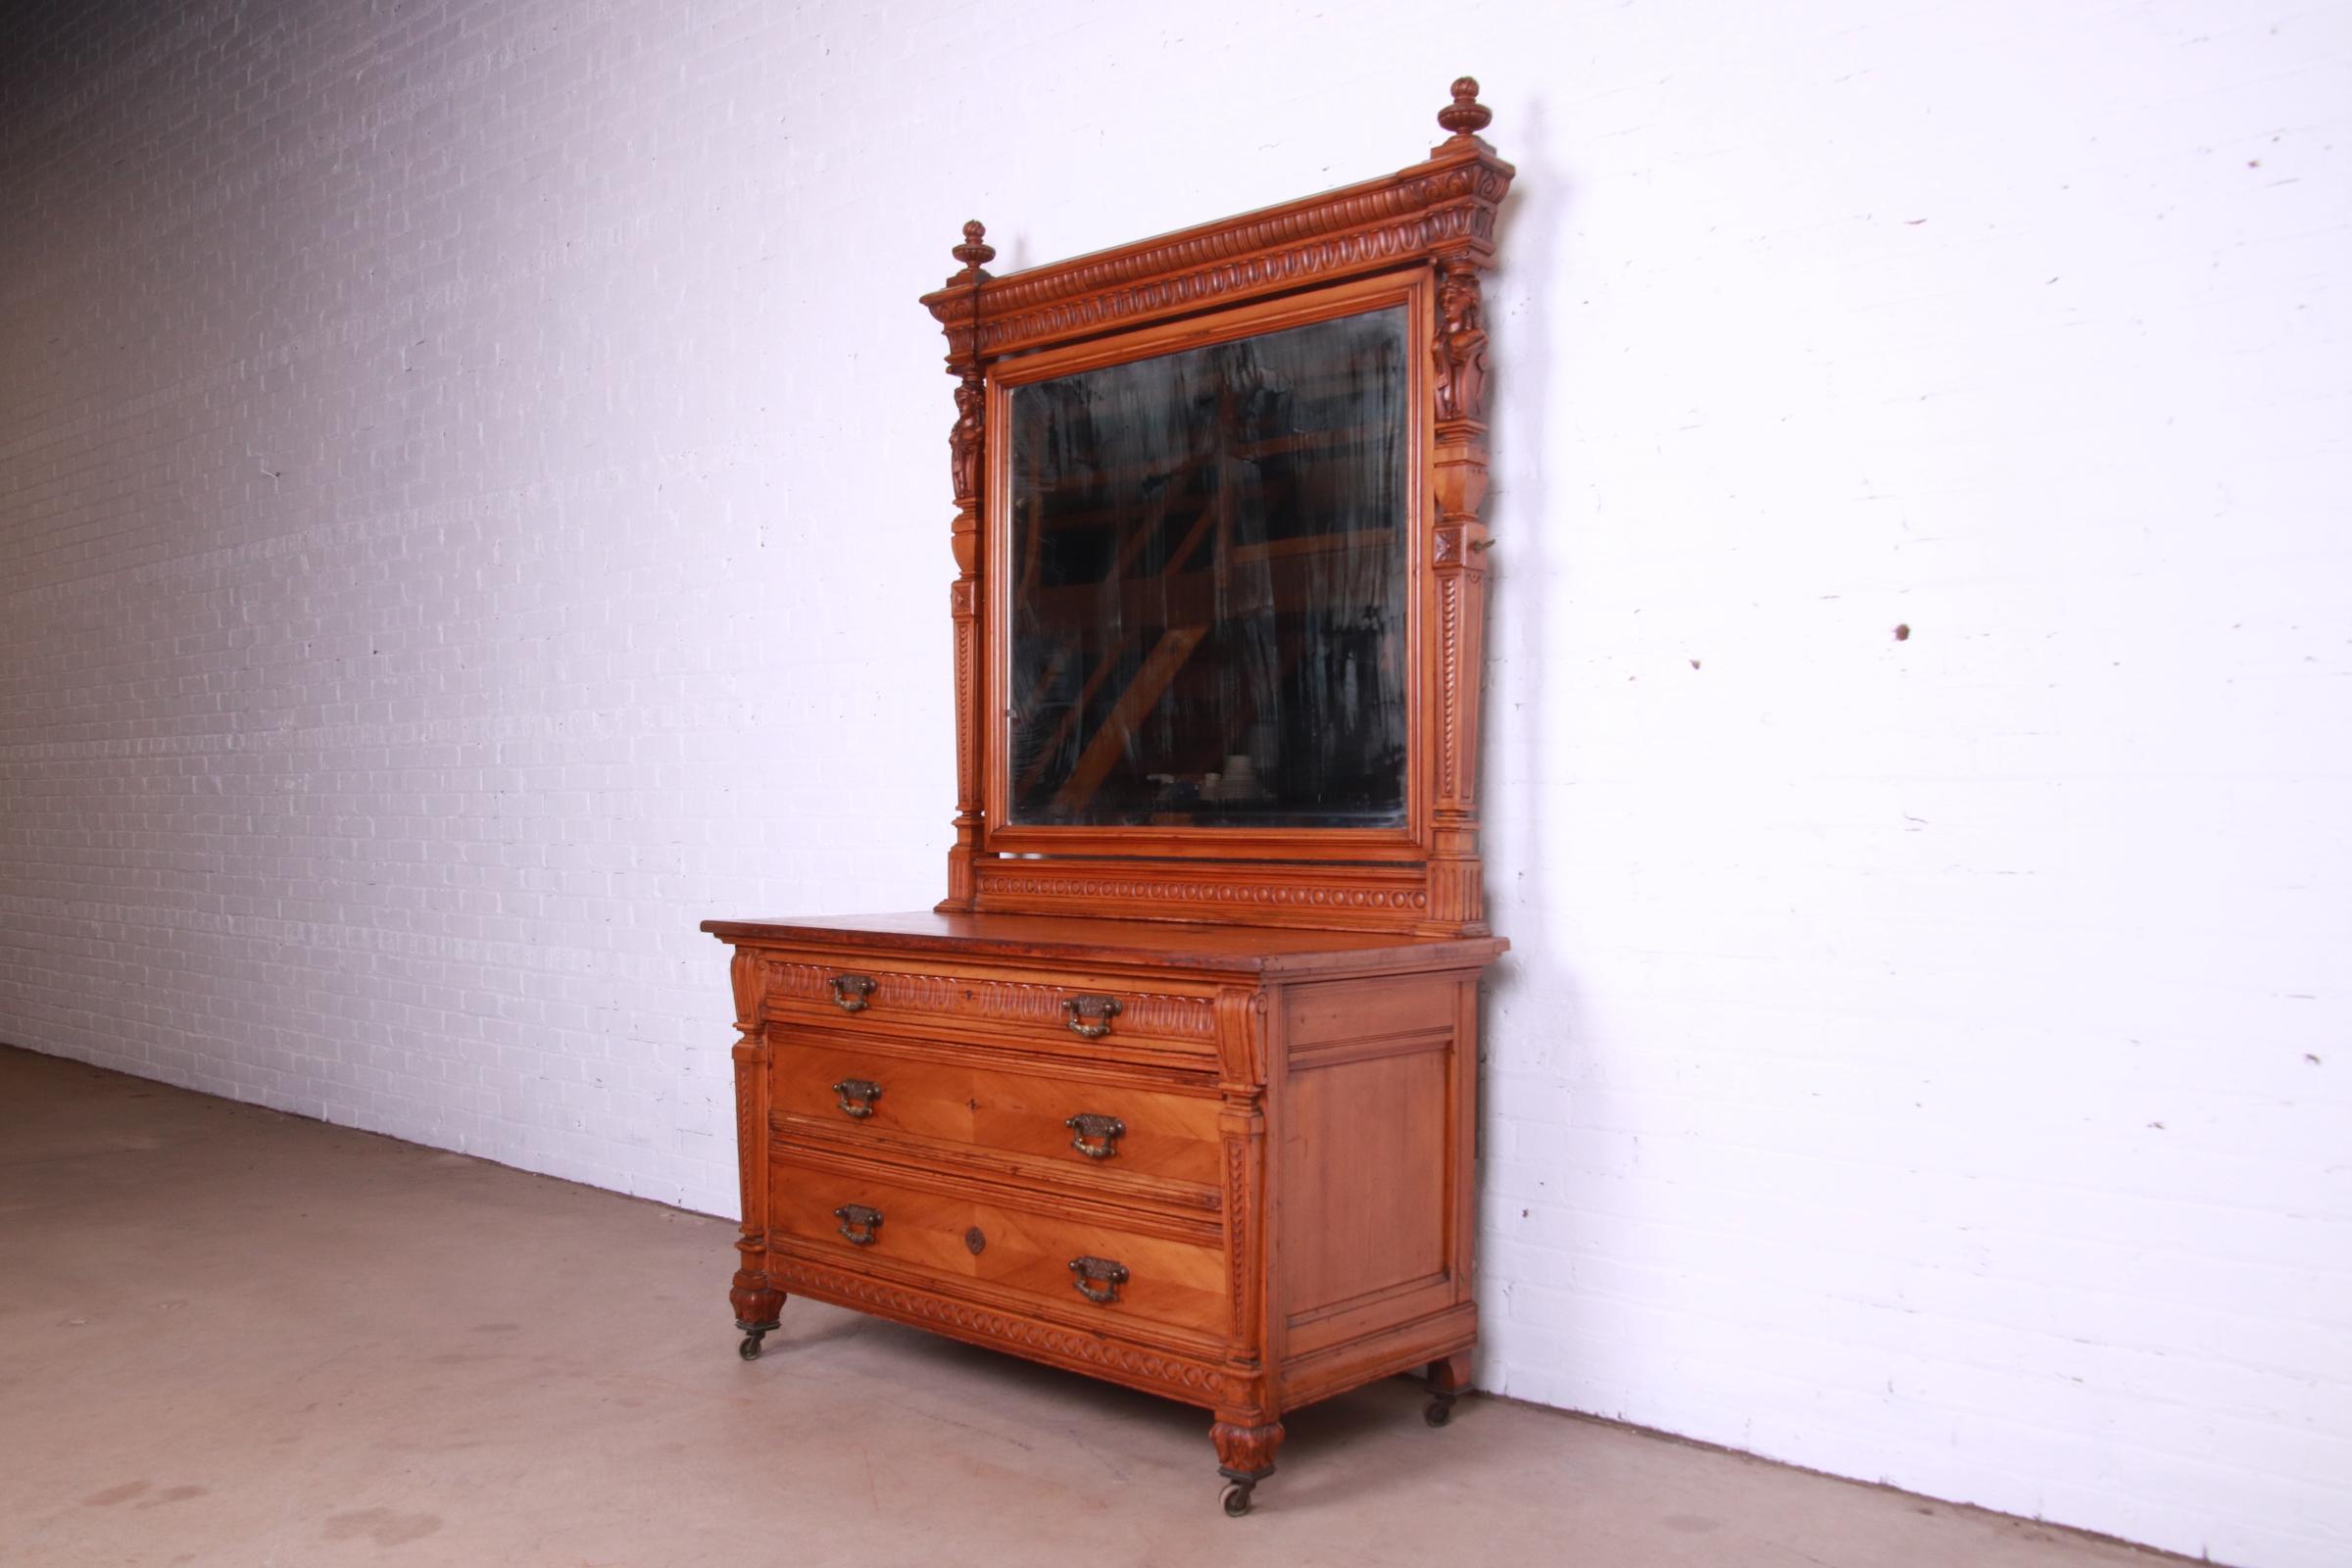 Antique Victorian Ornate Carved Walnut Dresser with Mirror Attributed to Horner In Good Condition For Sale In South Bend, IN